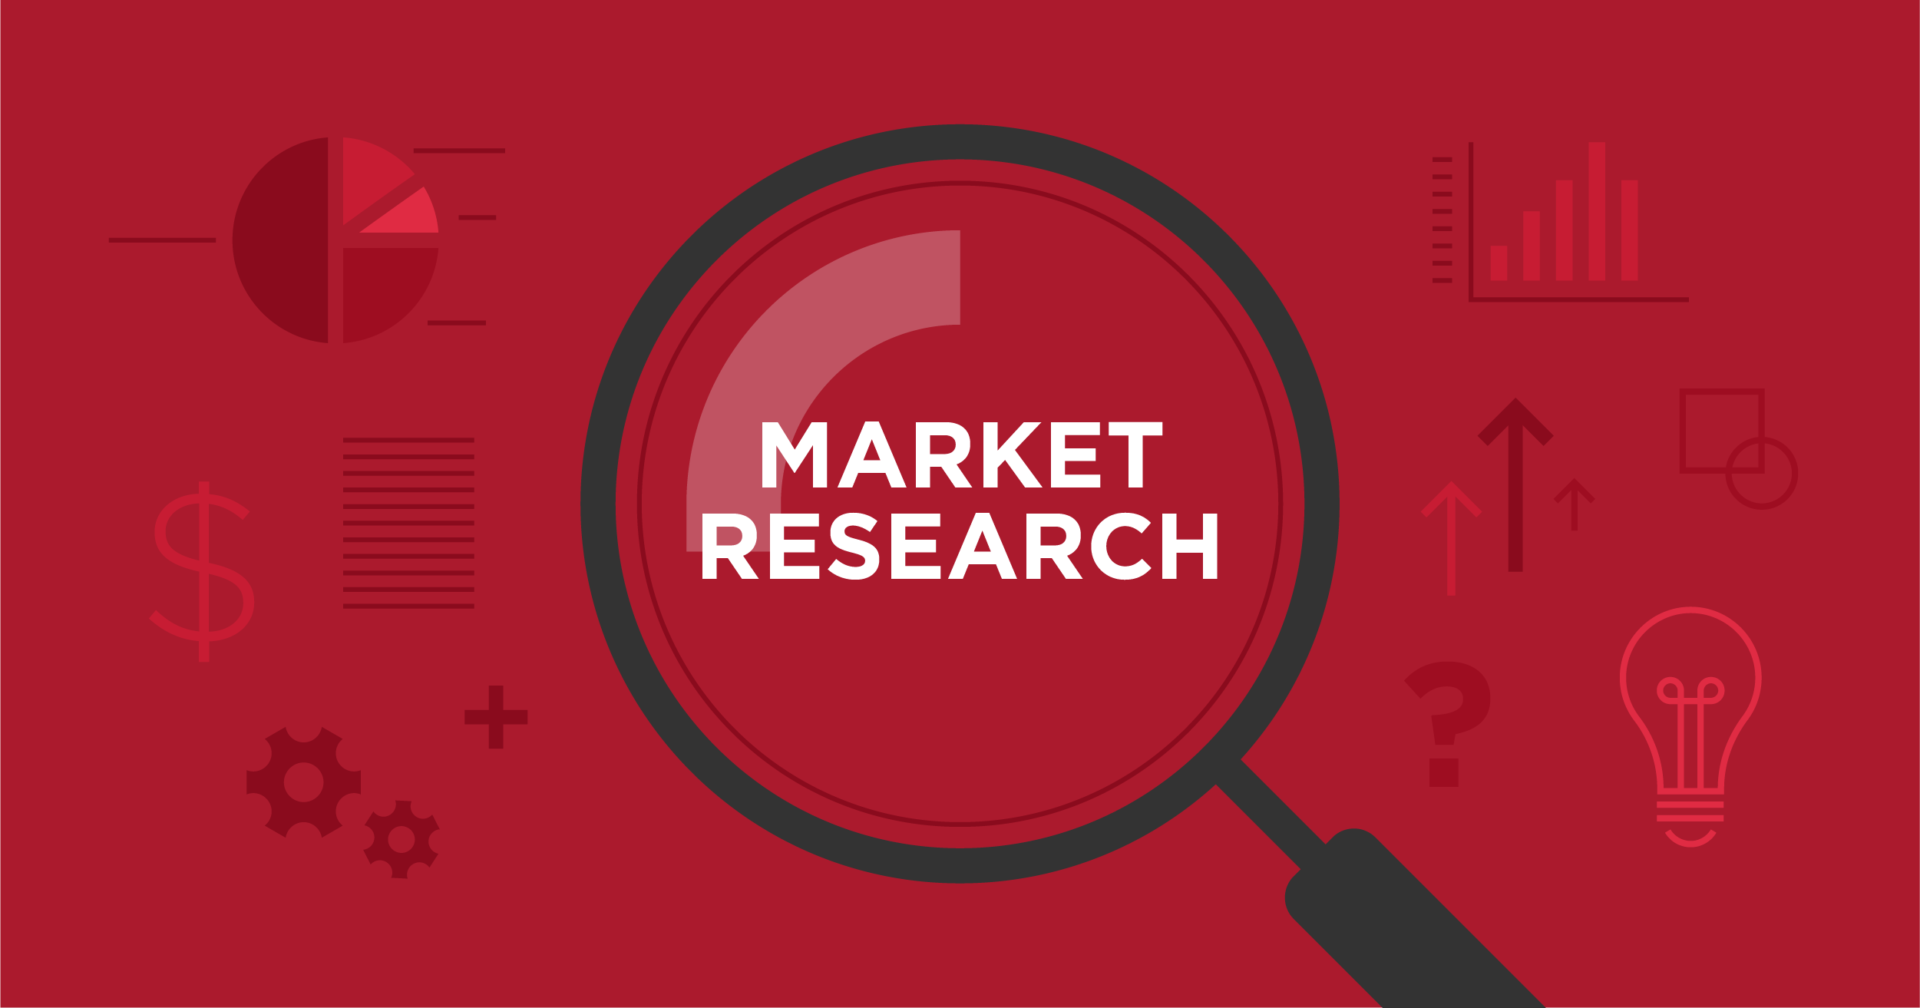 Medical Device Contract Manufacturing Market is estimated to be worth USD 126 Billion in 2030